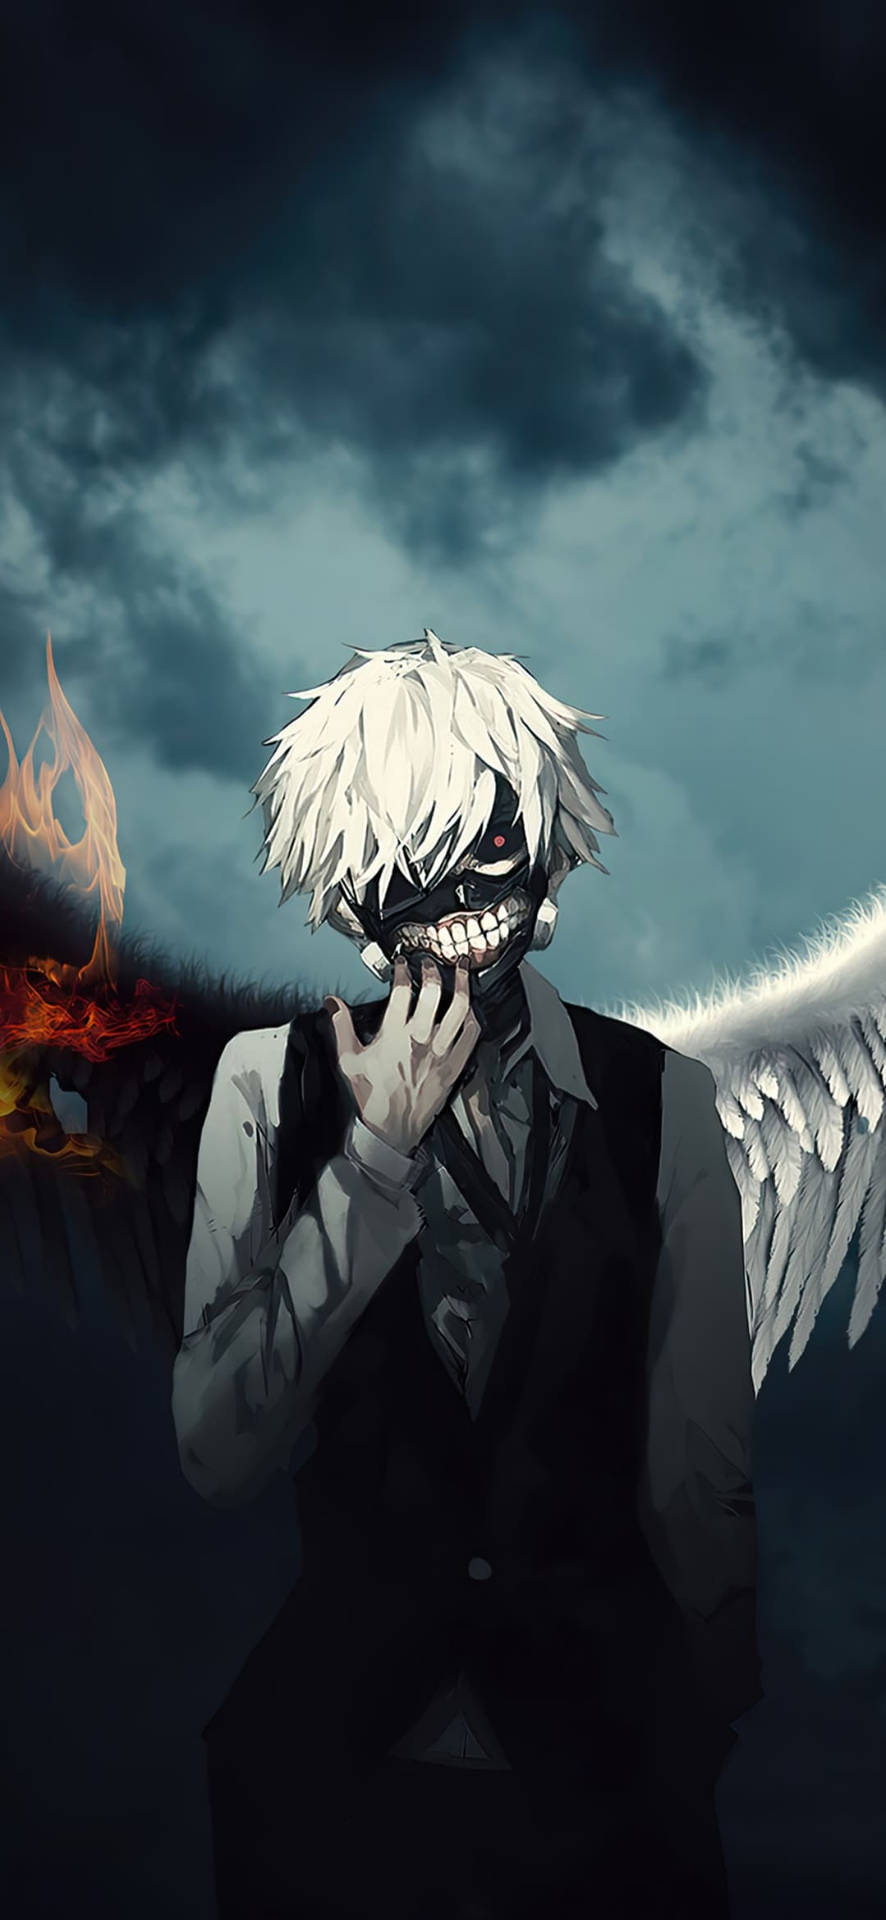 Download Ken With Wings Tokyo Ghoul Iphone Background Wallpaper | Wallpapers .com